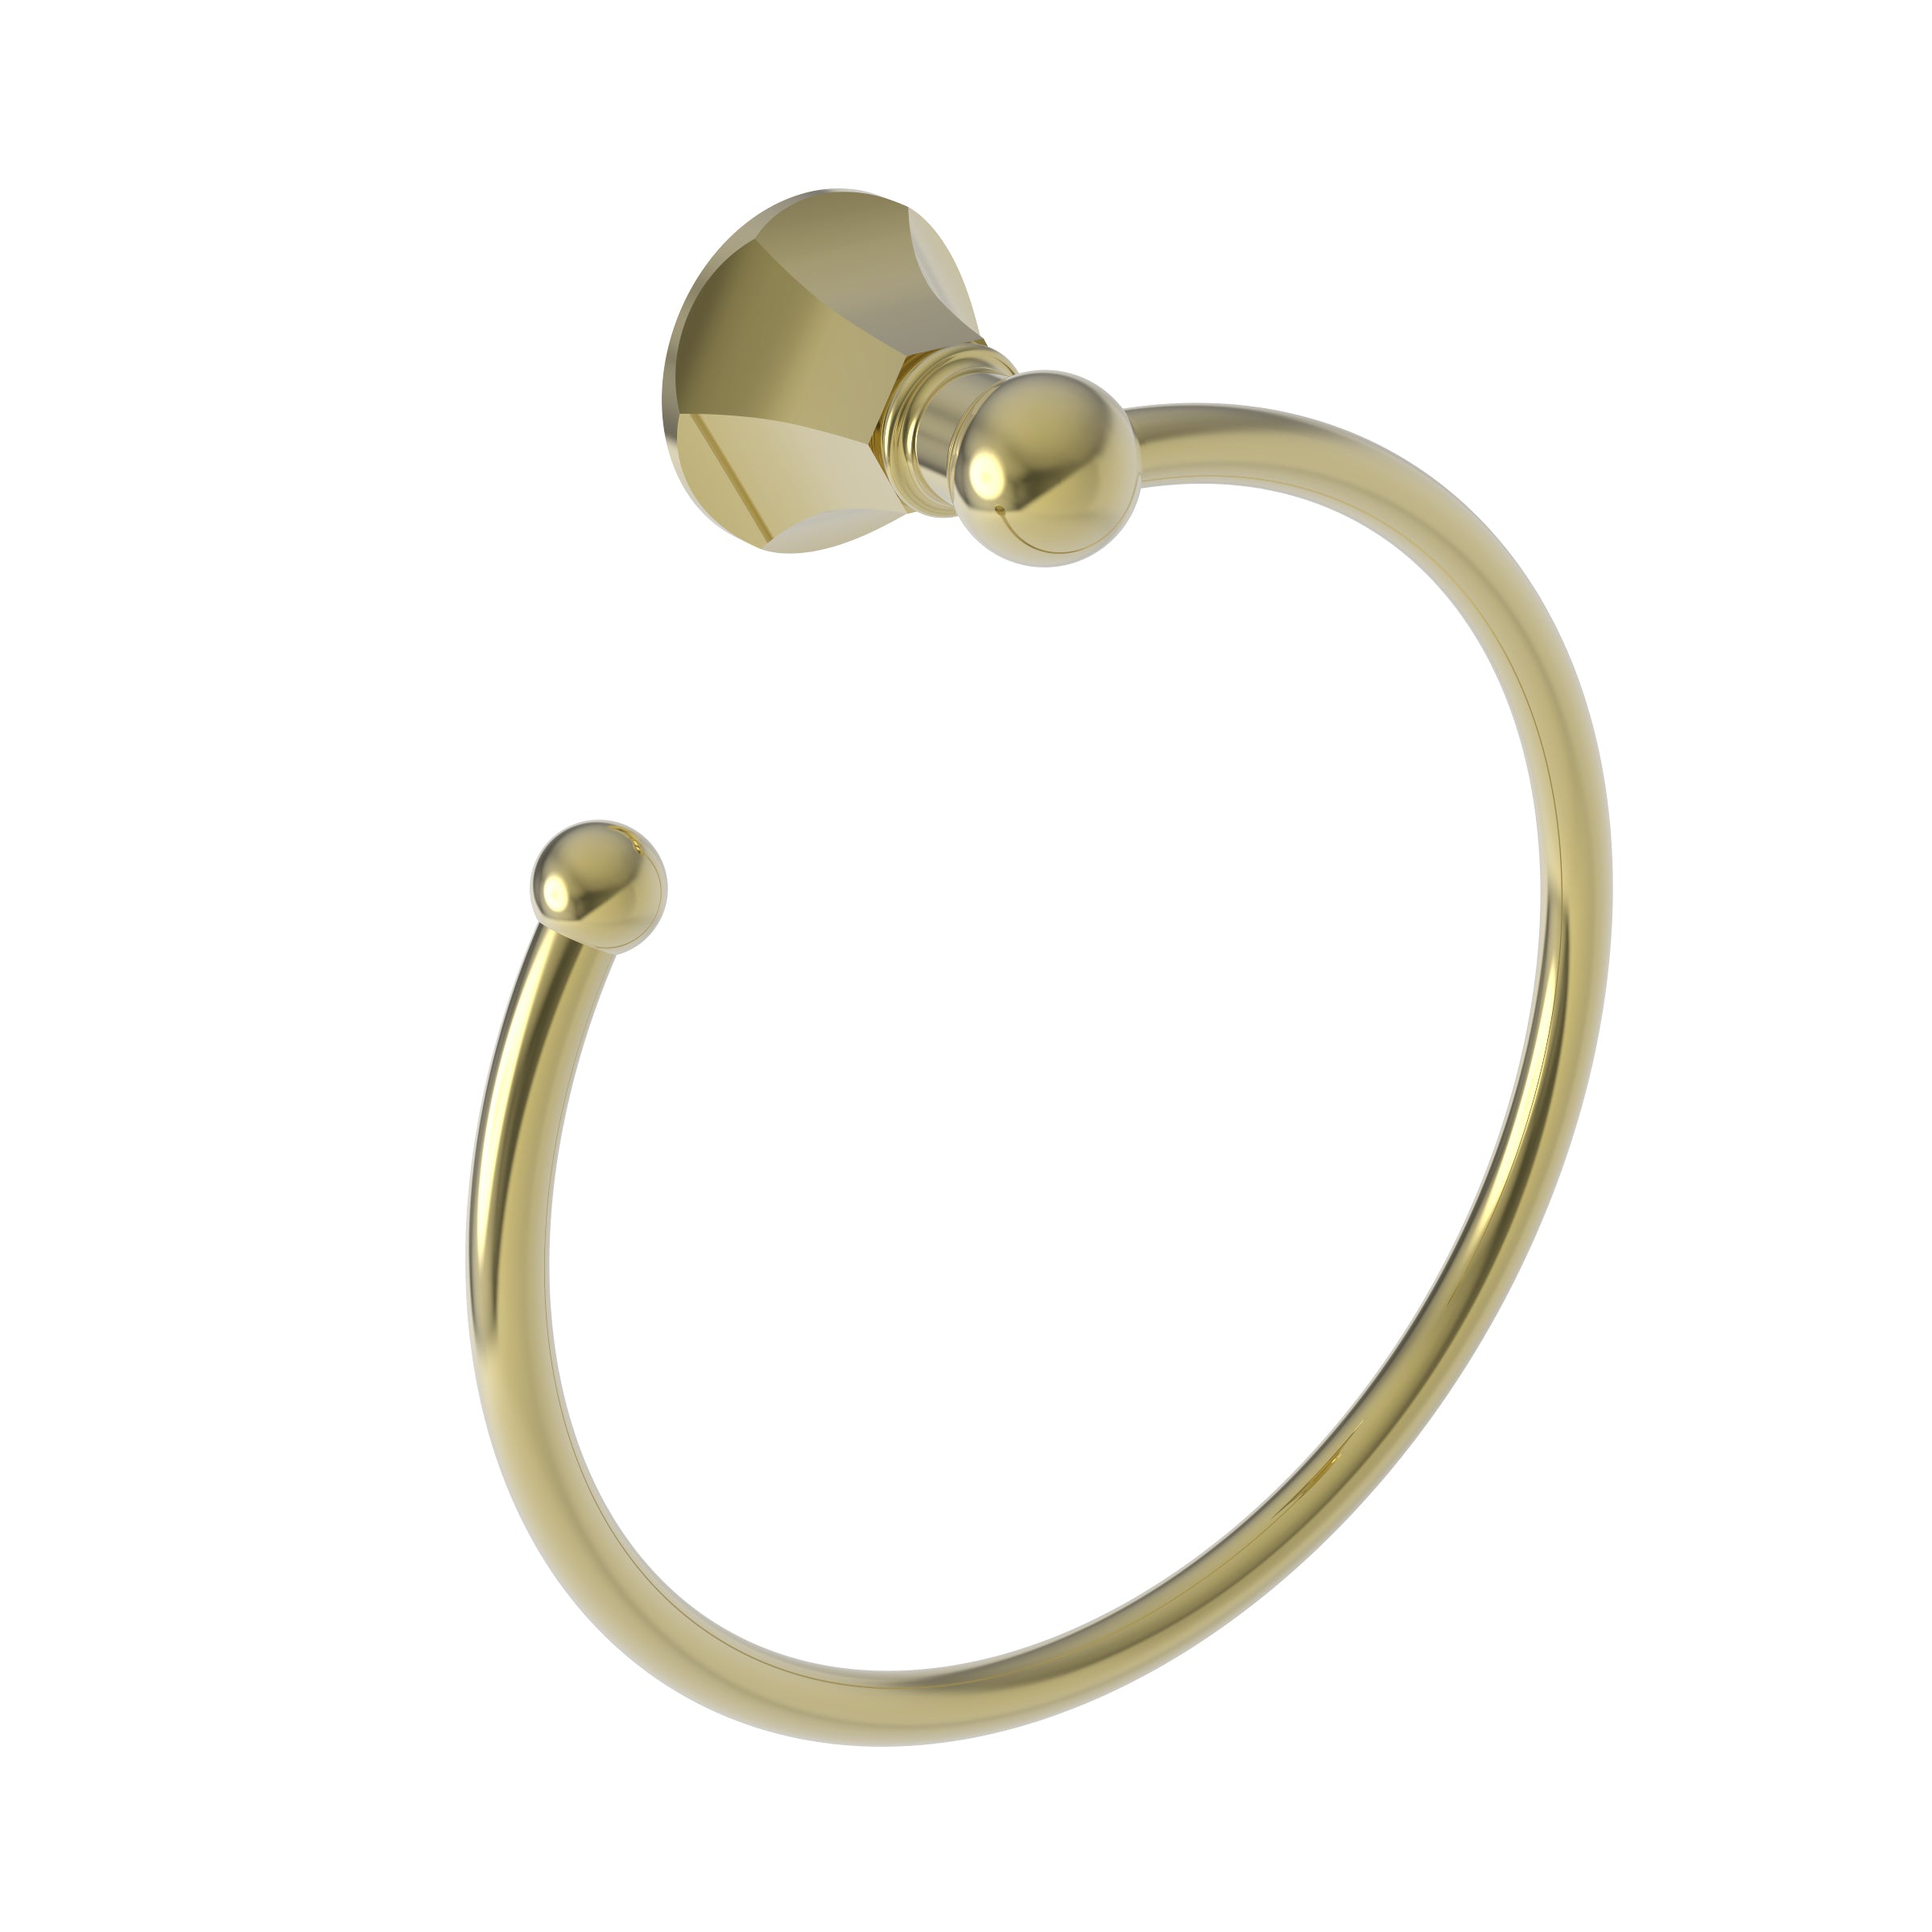 Transitional Brass Towel Ring